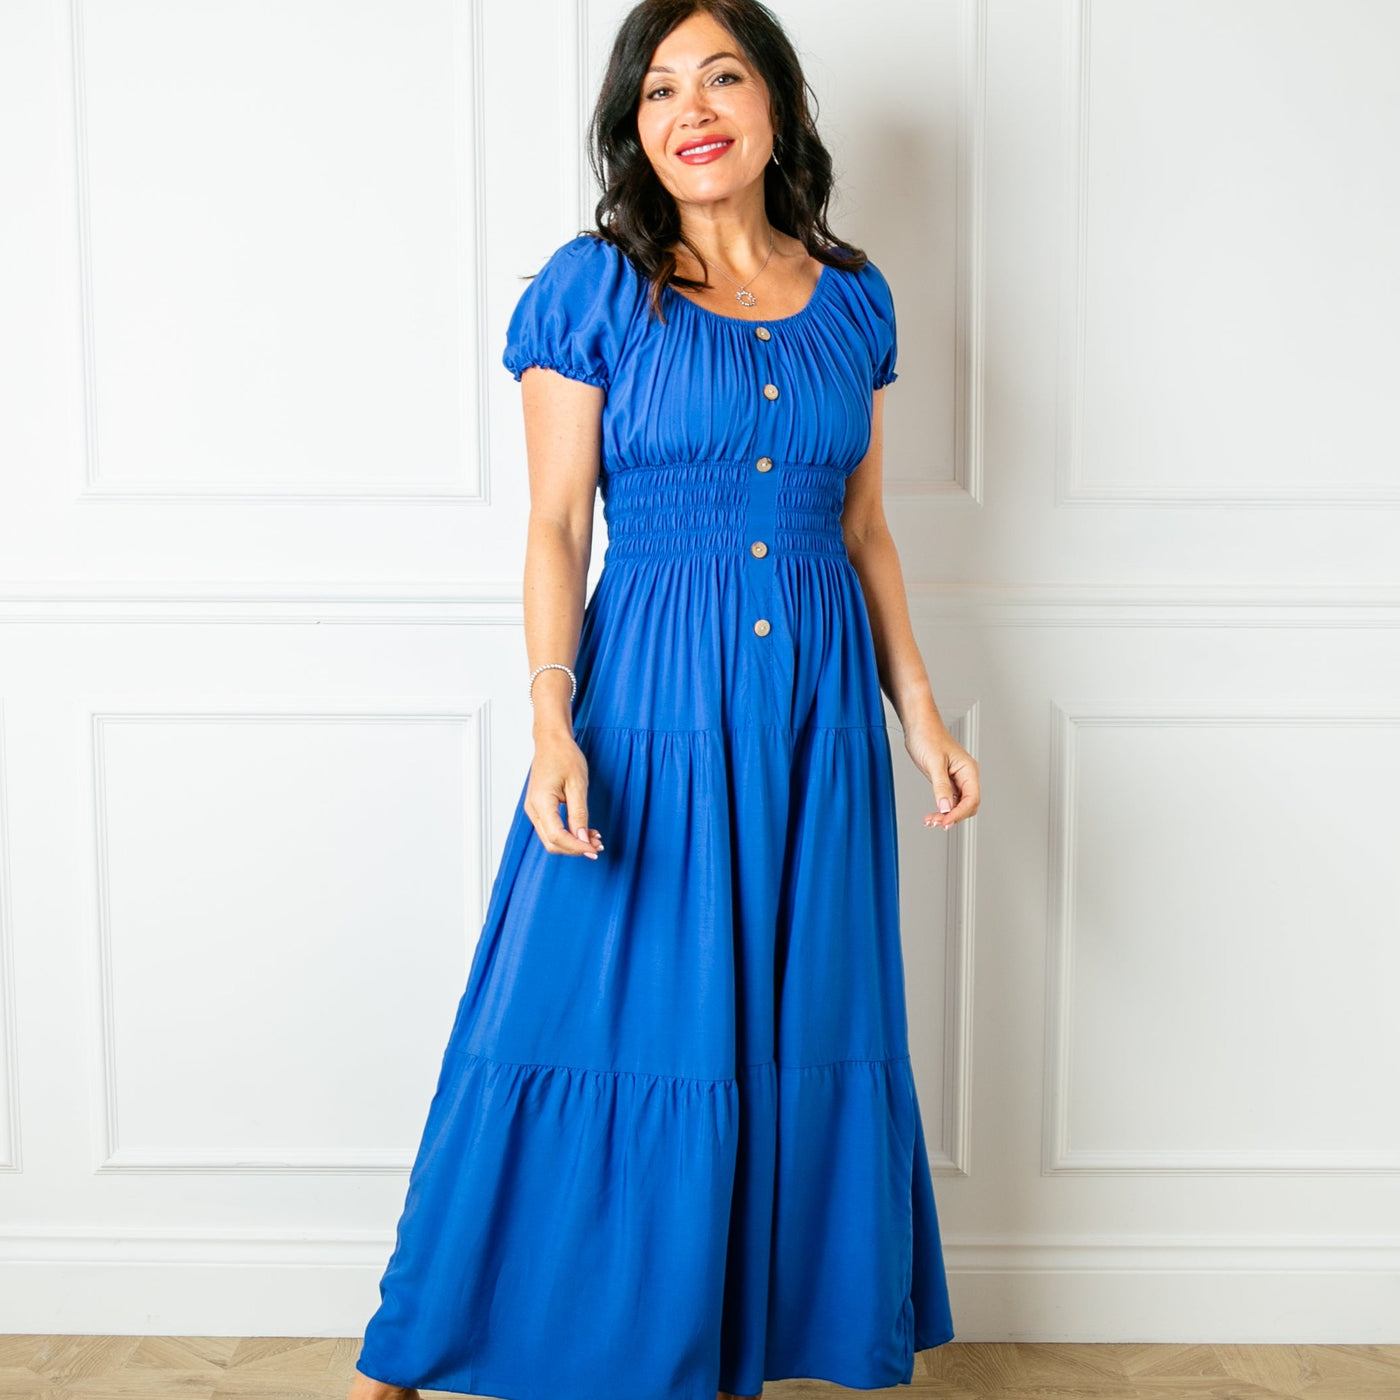 The royal blue Button Front Maxi Dress with short puffy sleeves that can be worn on or off the shoulder